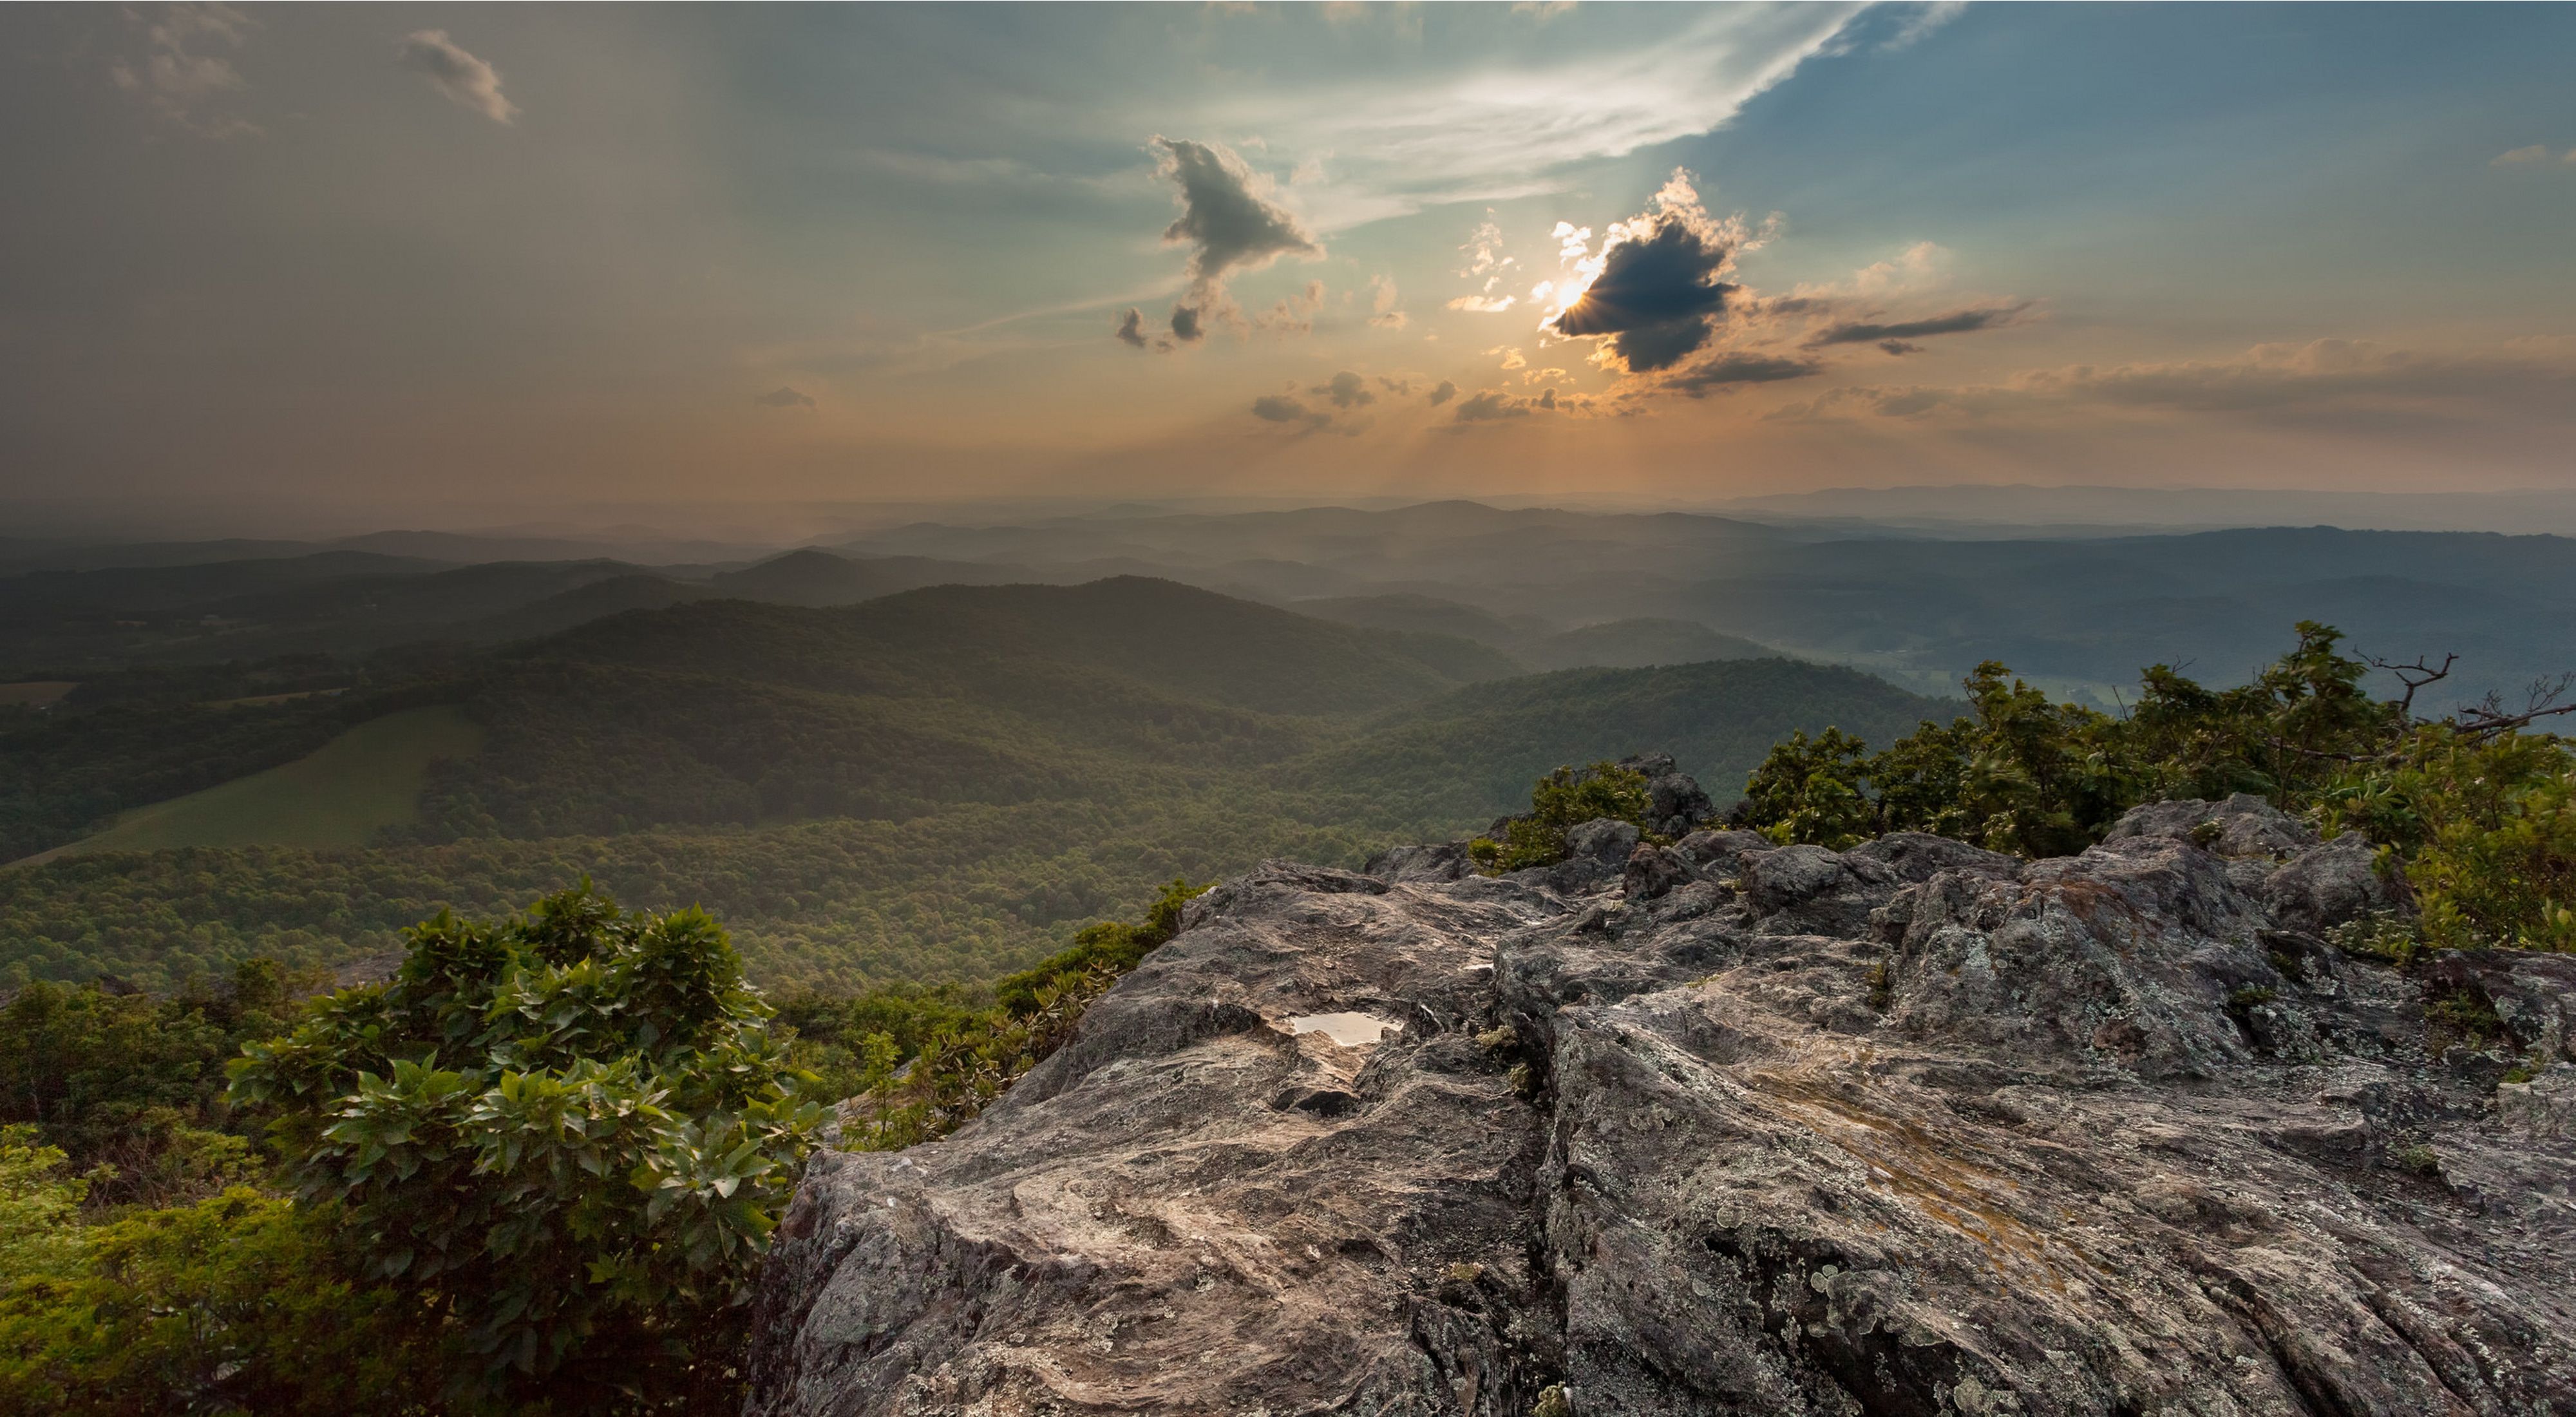 View from a rock outcrop looking over rolling forested green mountain ridge tops as the sun sets behind a bank of clouds.